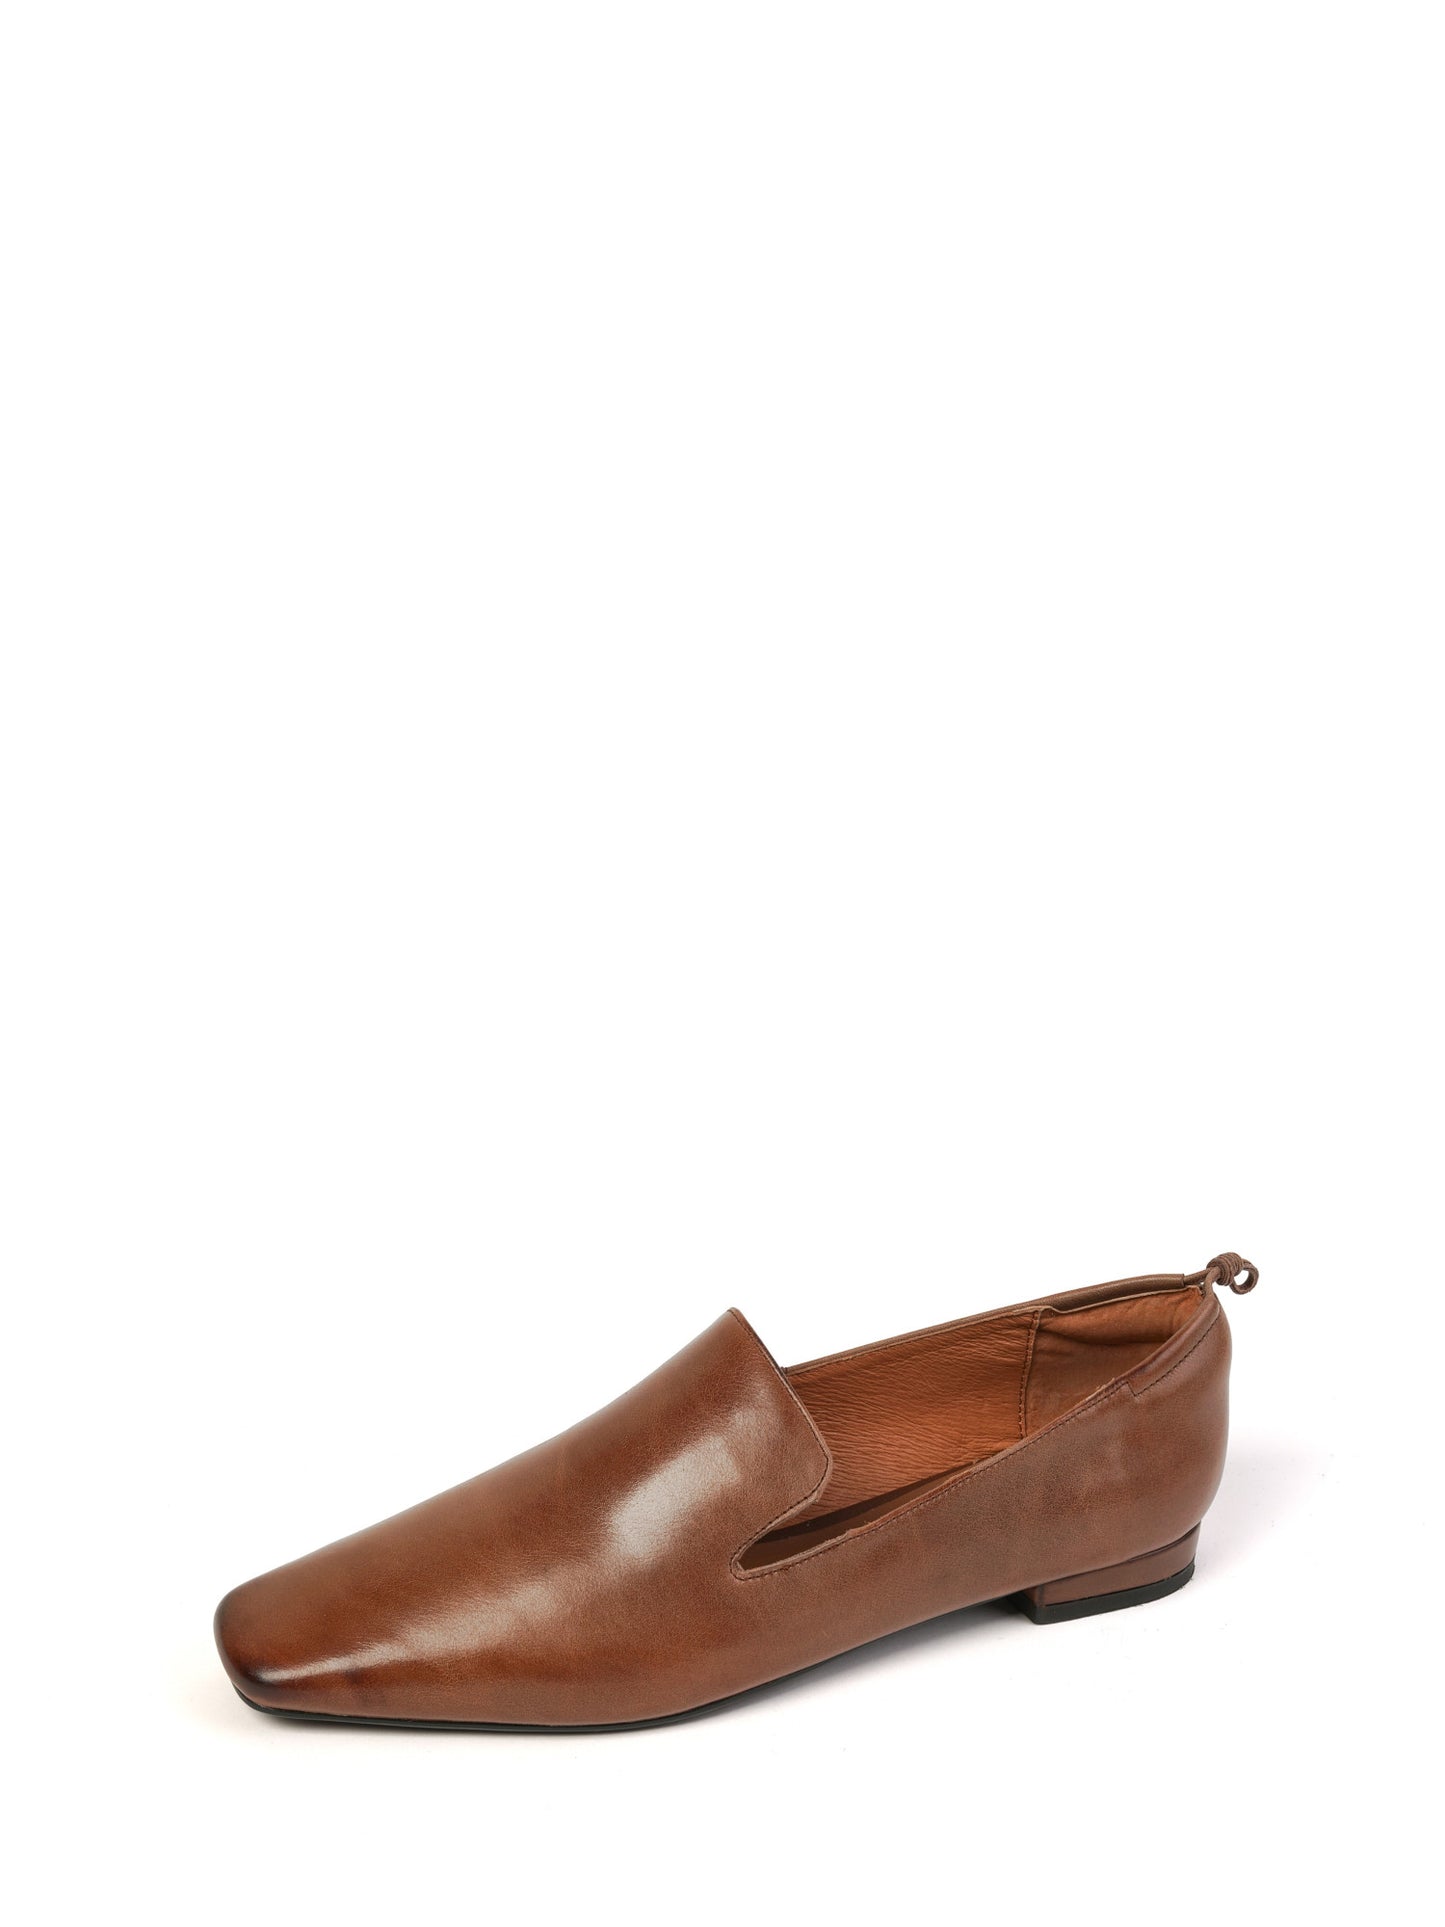 Gile-Brown-Leather-Flat-Loafers